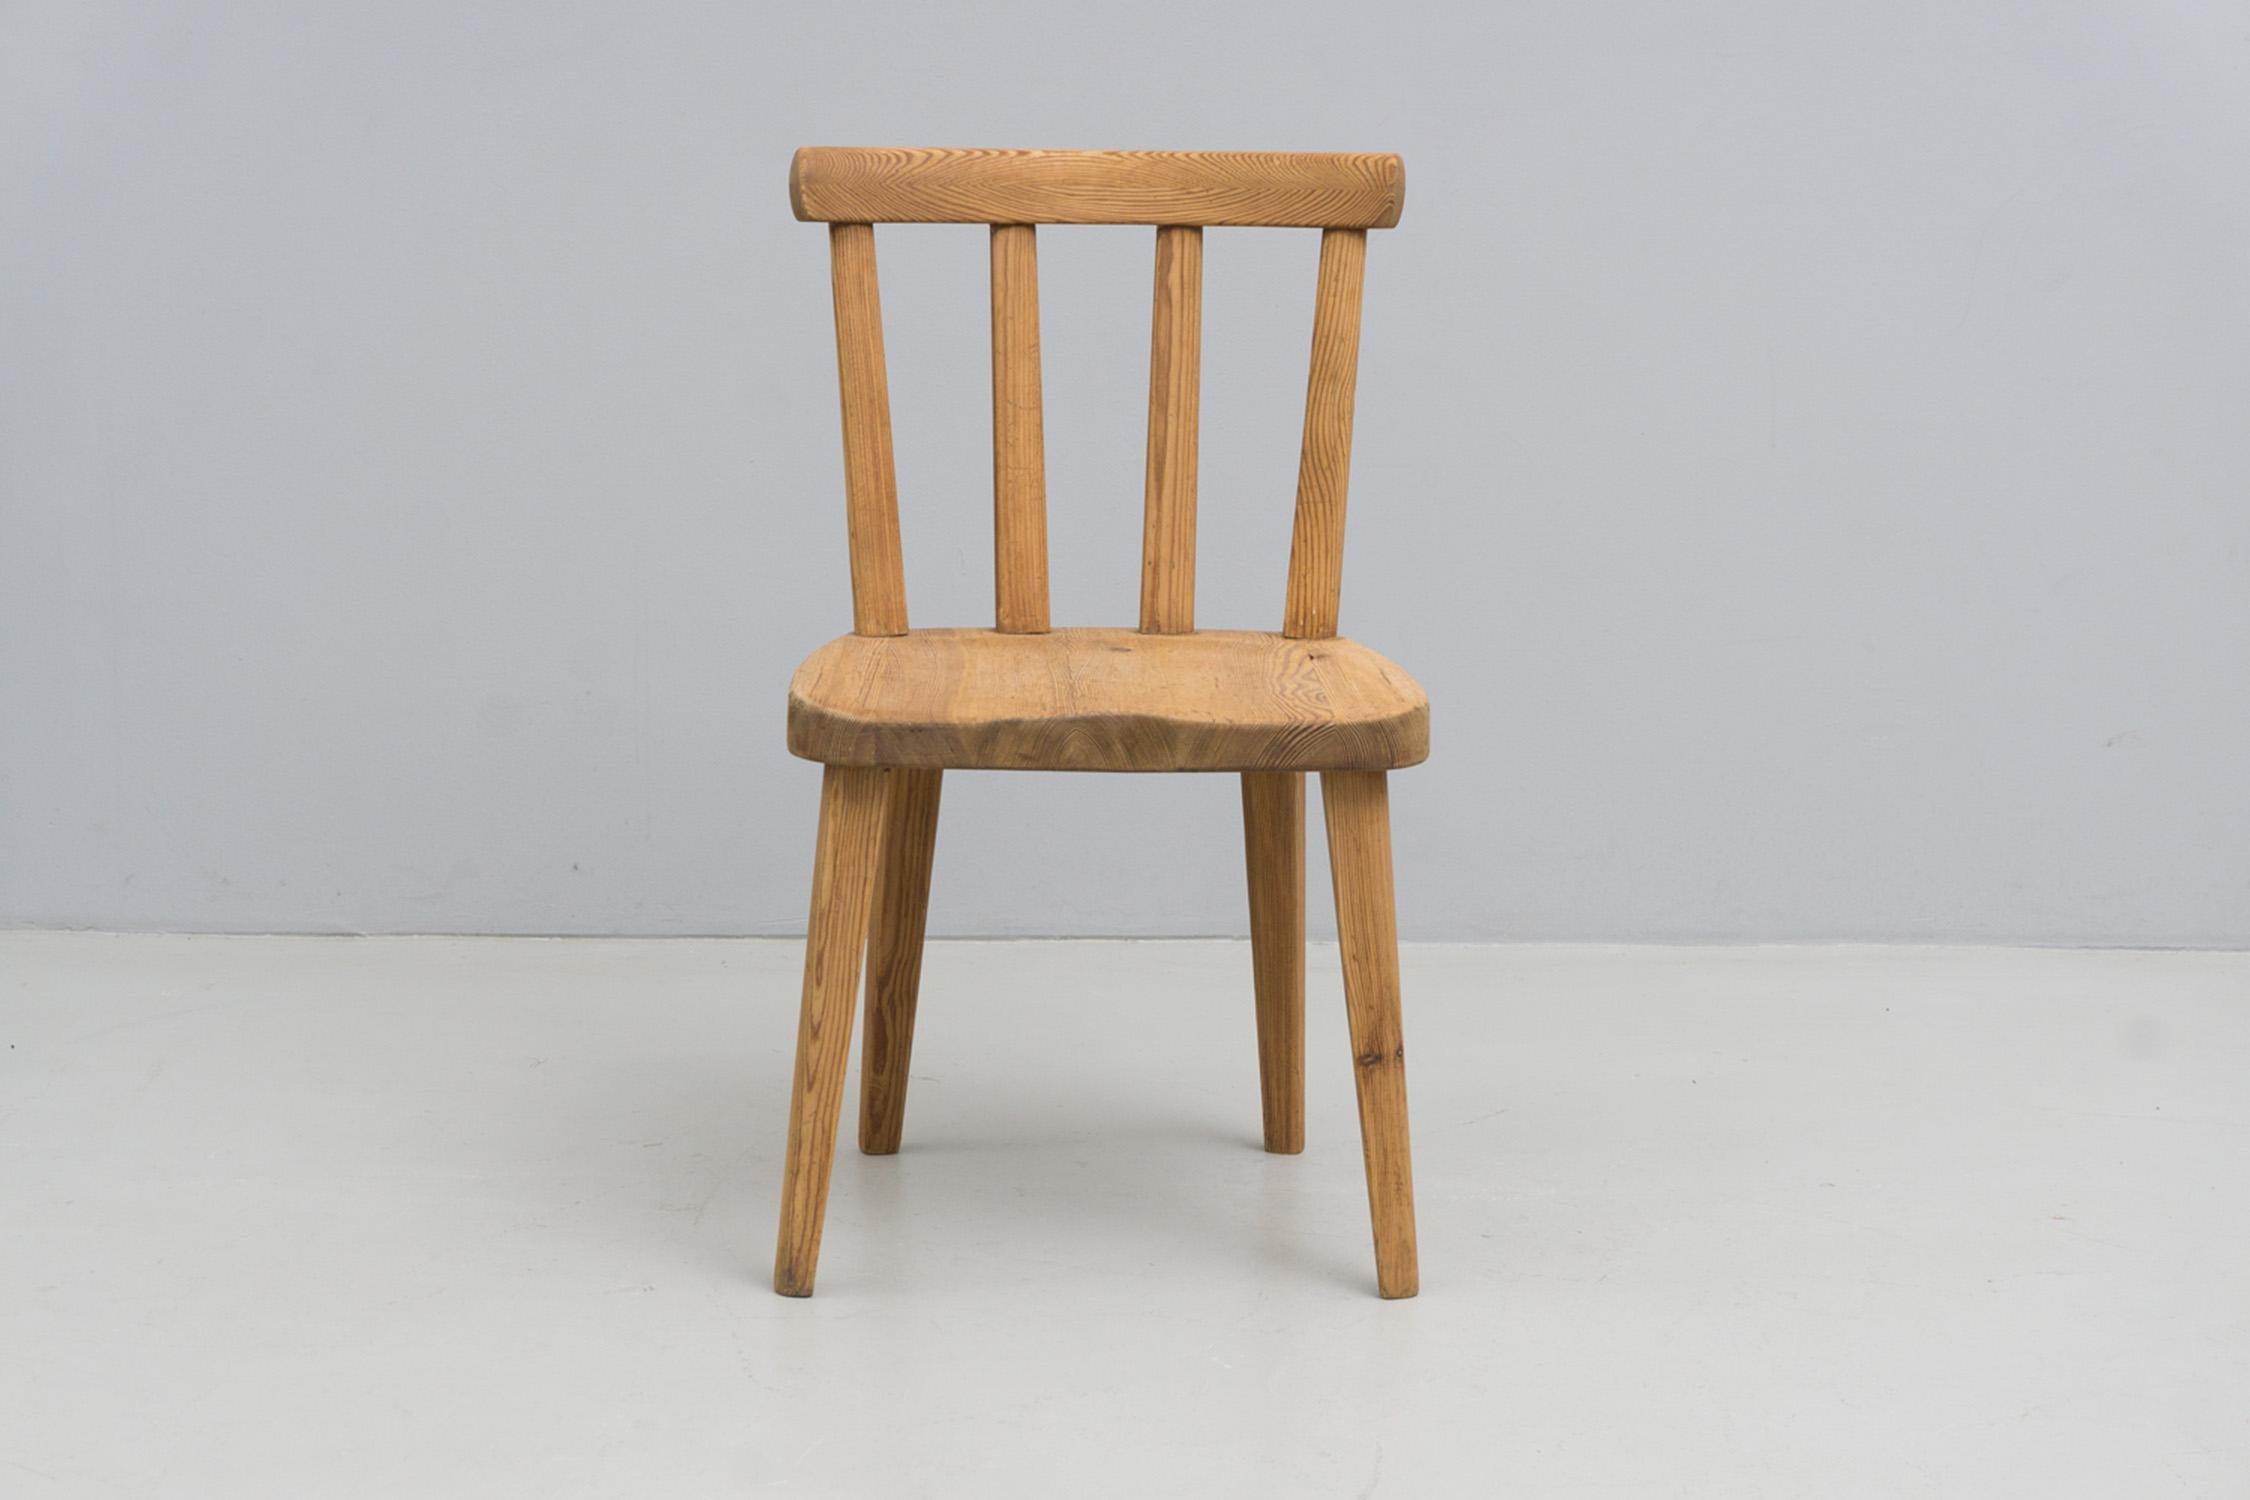 Set of Swedish Pine Wood Chairs, 'Uto' by Axel Einar Hjorth, 1930 For Sale 5